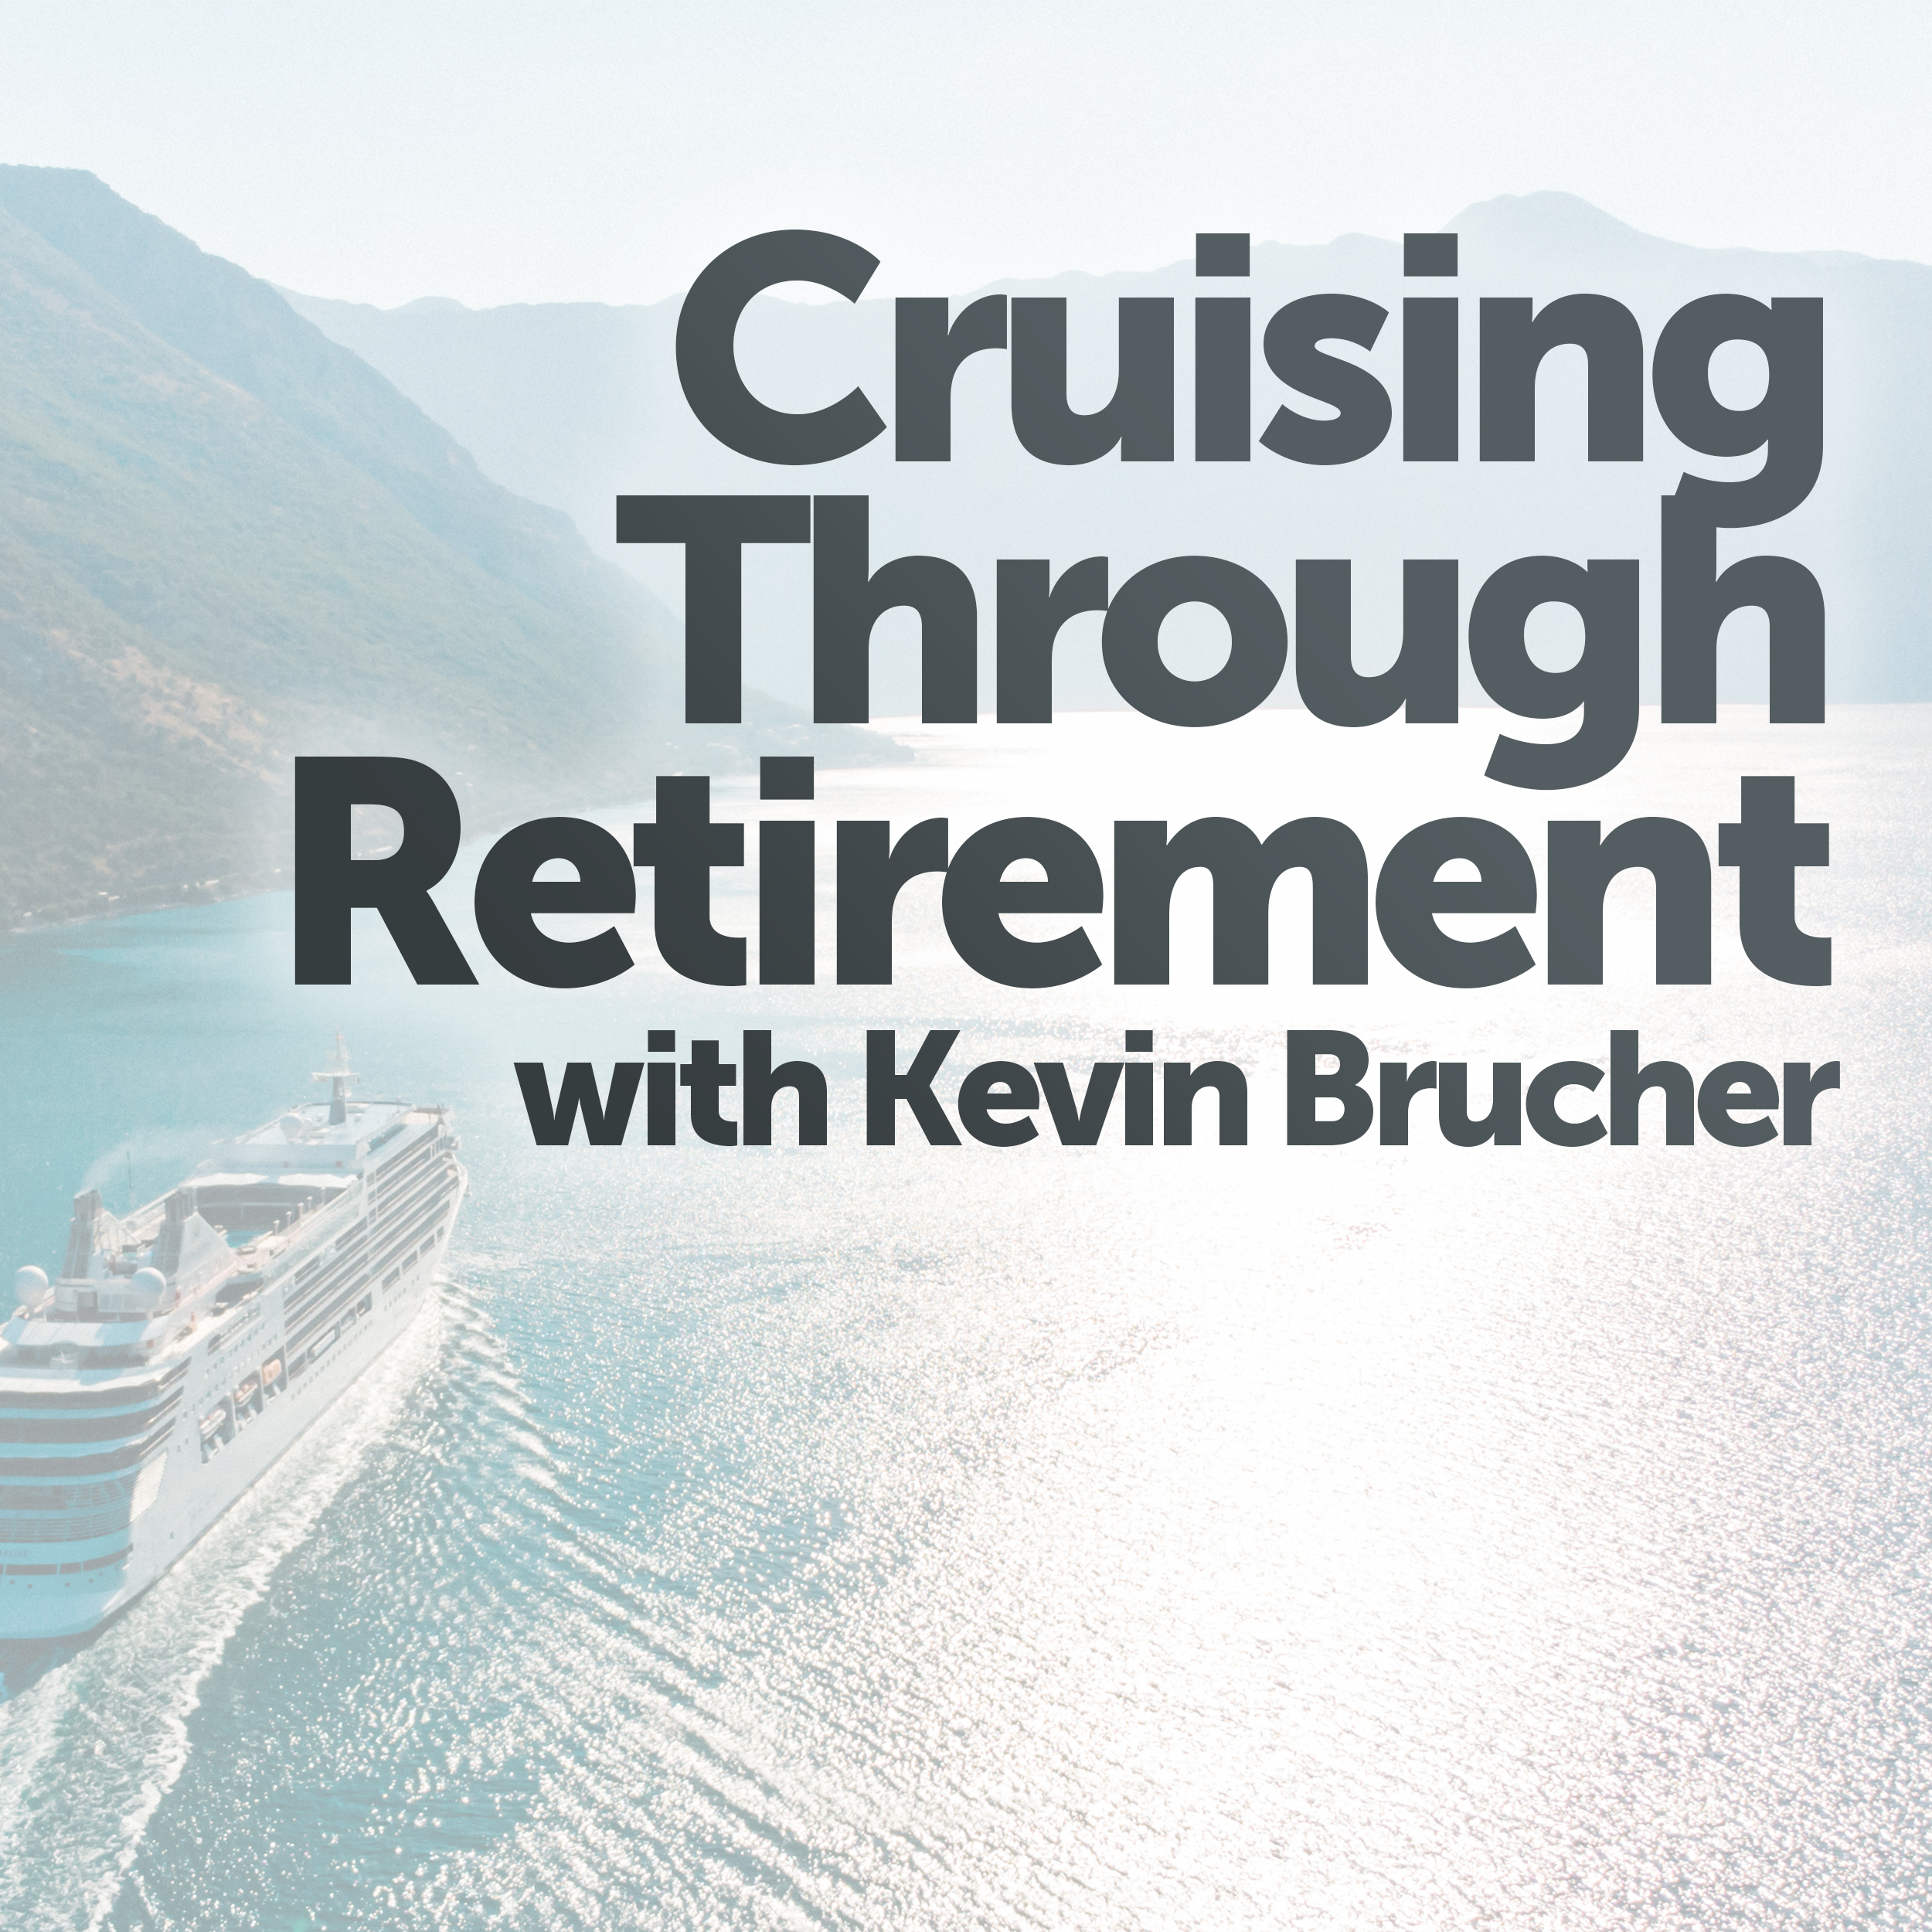 Cruising Through Retirement  This week Kevin Brucher offers some tips to help you figure out the right time to retire.